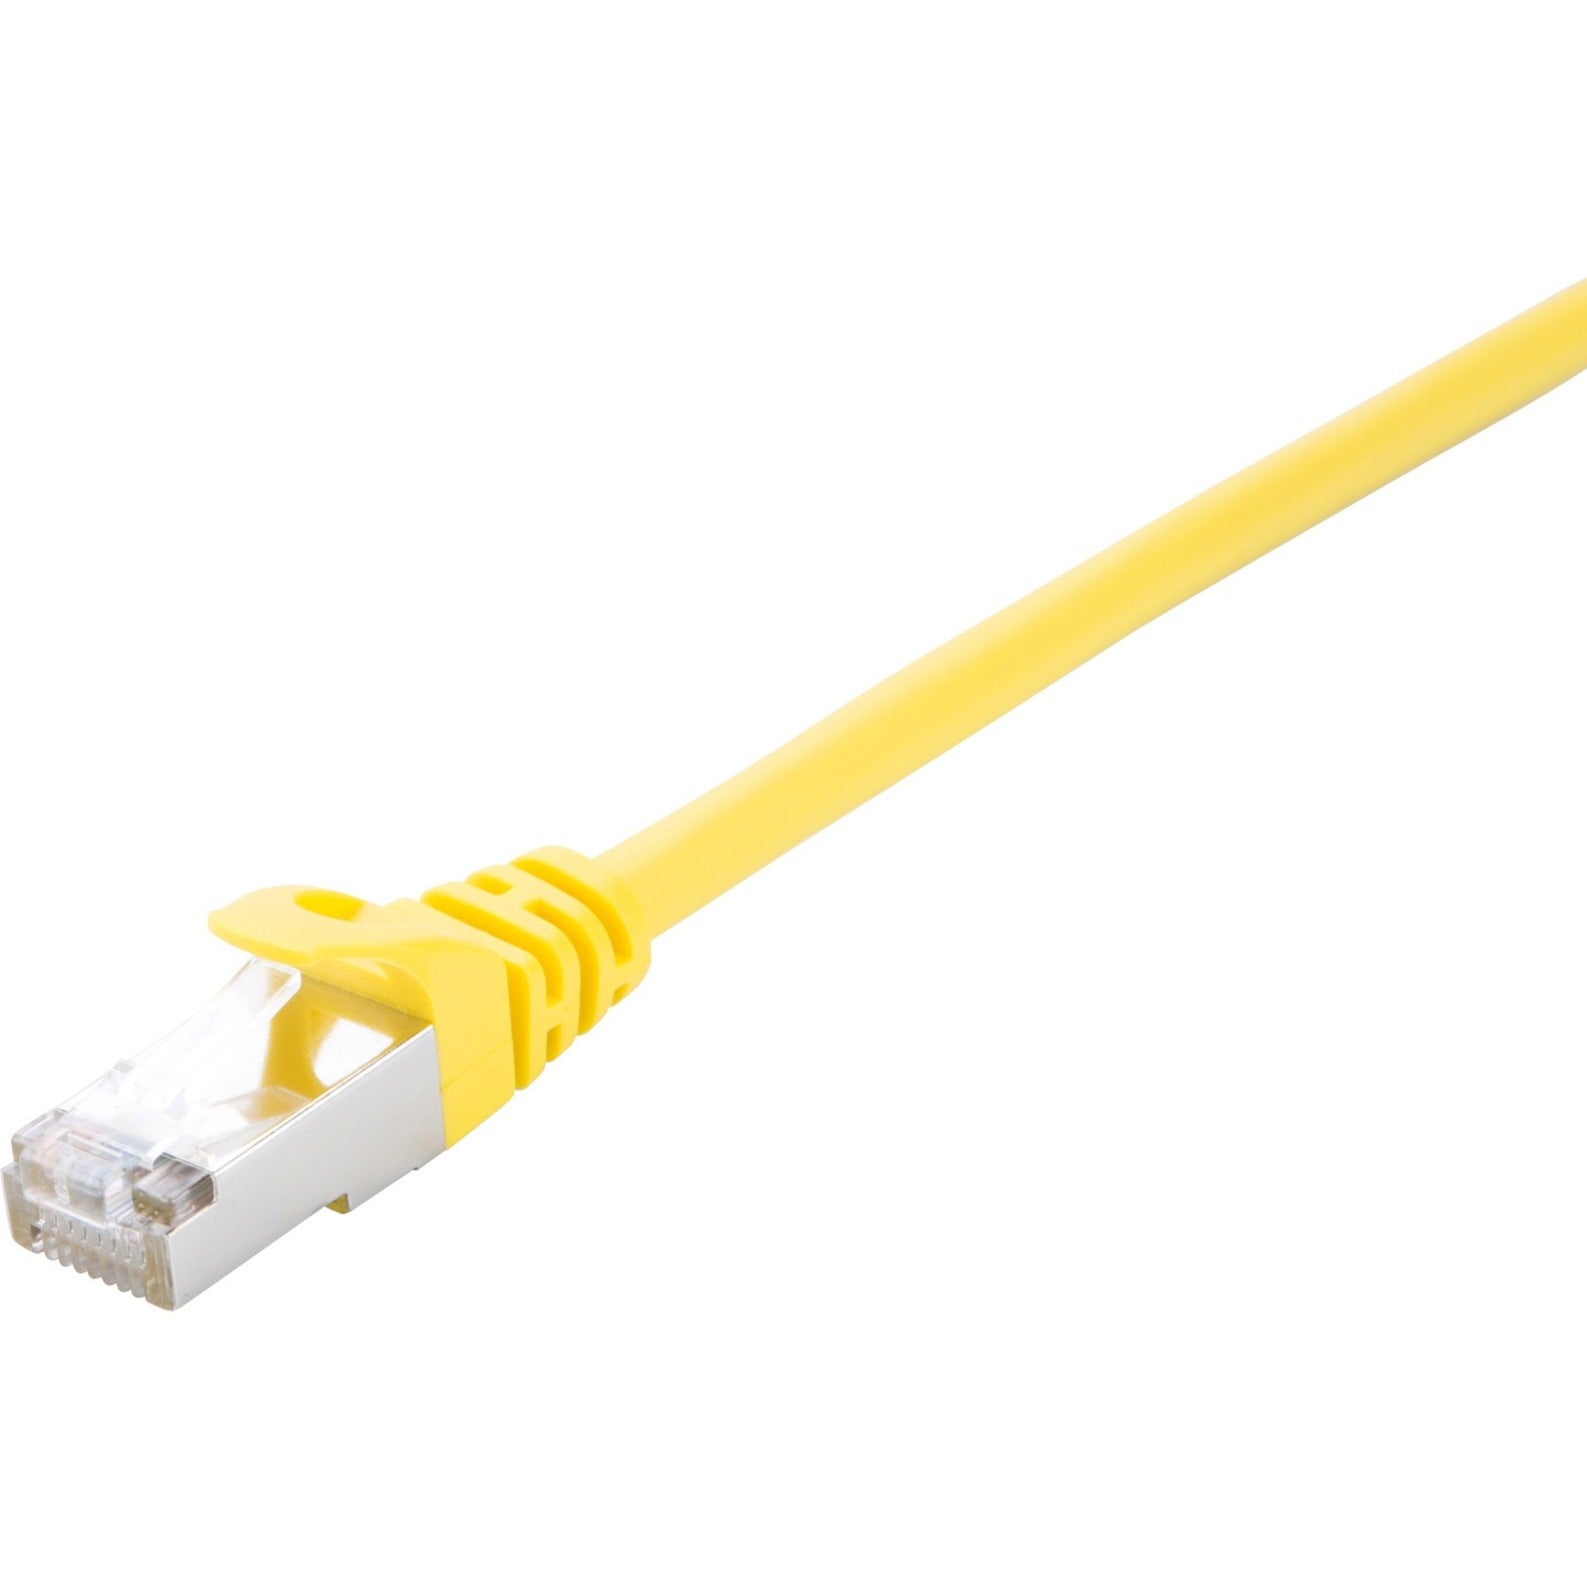 V7 V7CAT6STP-01M-YLW-1N Yellow Cat6 Shielded (STP) Cable RJ45 Male to RJ45 Male 1m 3.3ft, Strain Relief, Locking Latch, Crosstalk Protection, Noise Reducing